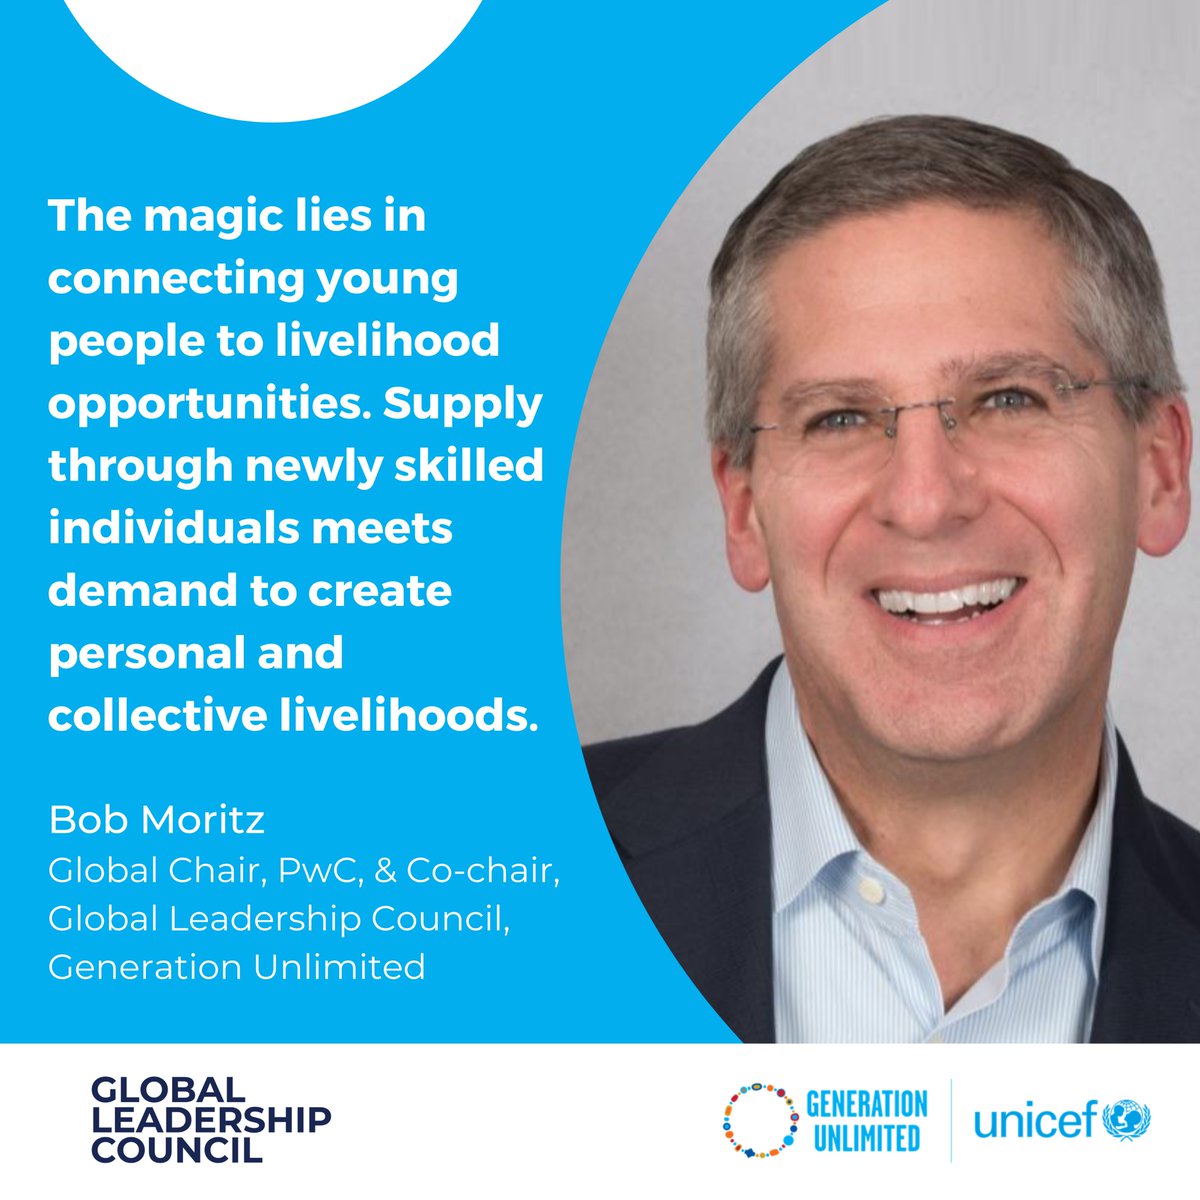 A partnership movement that not only skills but also connects young people to opportunities. Thanks to @GenUnlimited_ Global Leadership Council Co-Chair & @PwC Global Chair @Bob_Moritz for moderating a discussion on delivering long-term results for youth 🌐. #SkillsRightNow